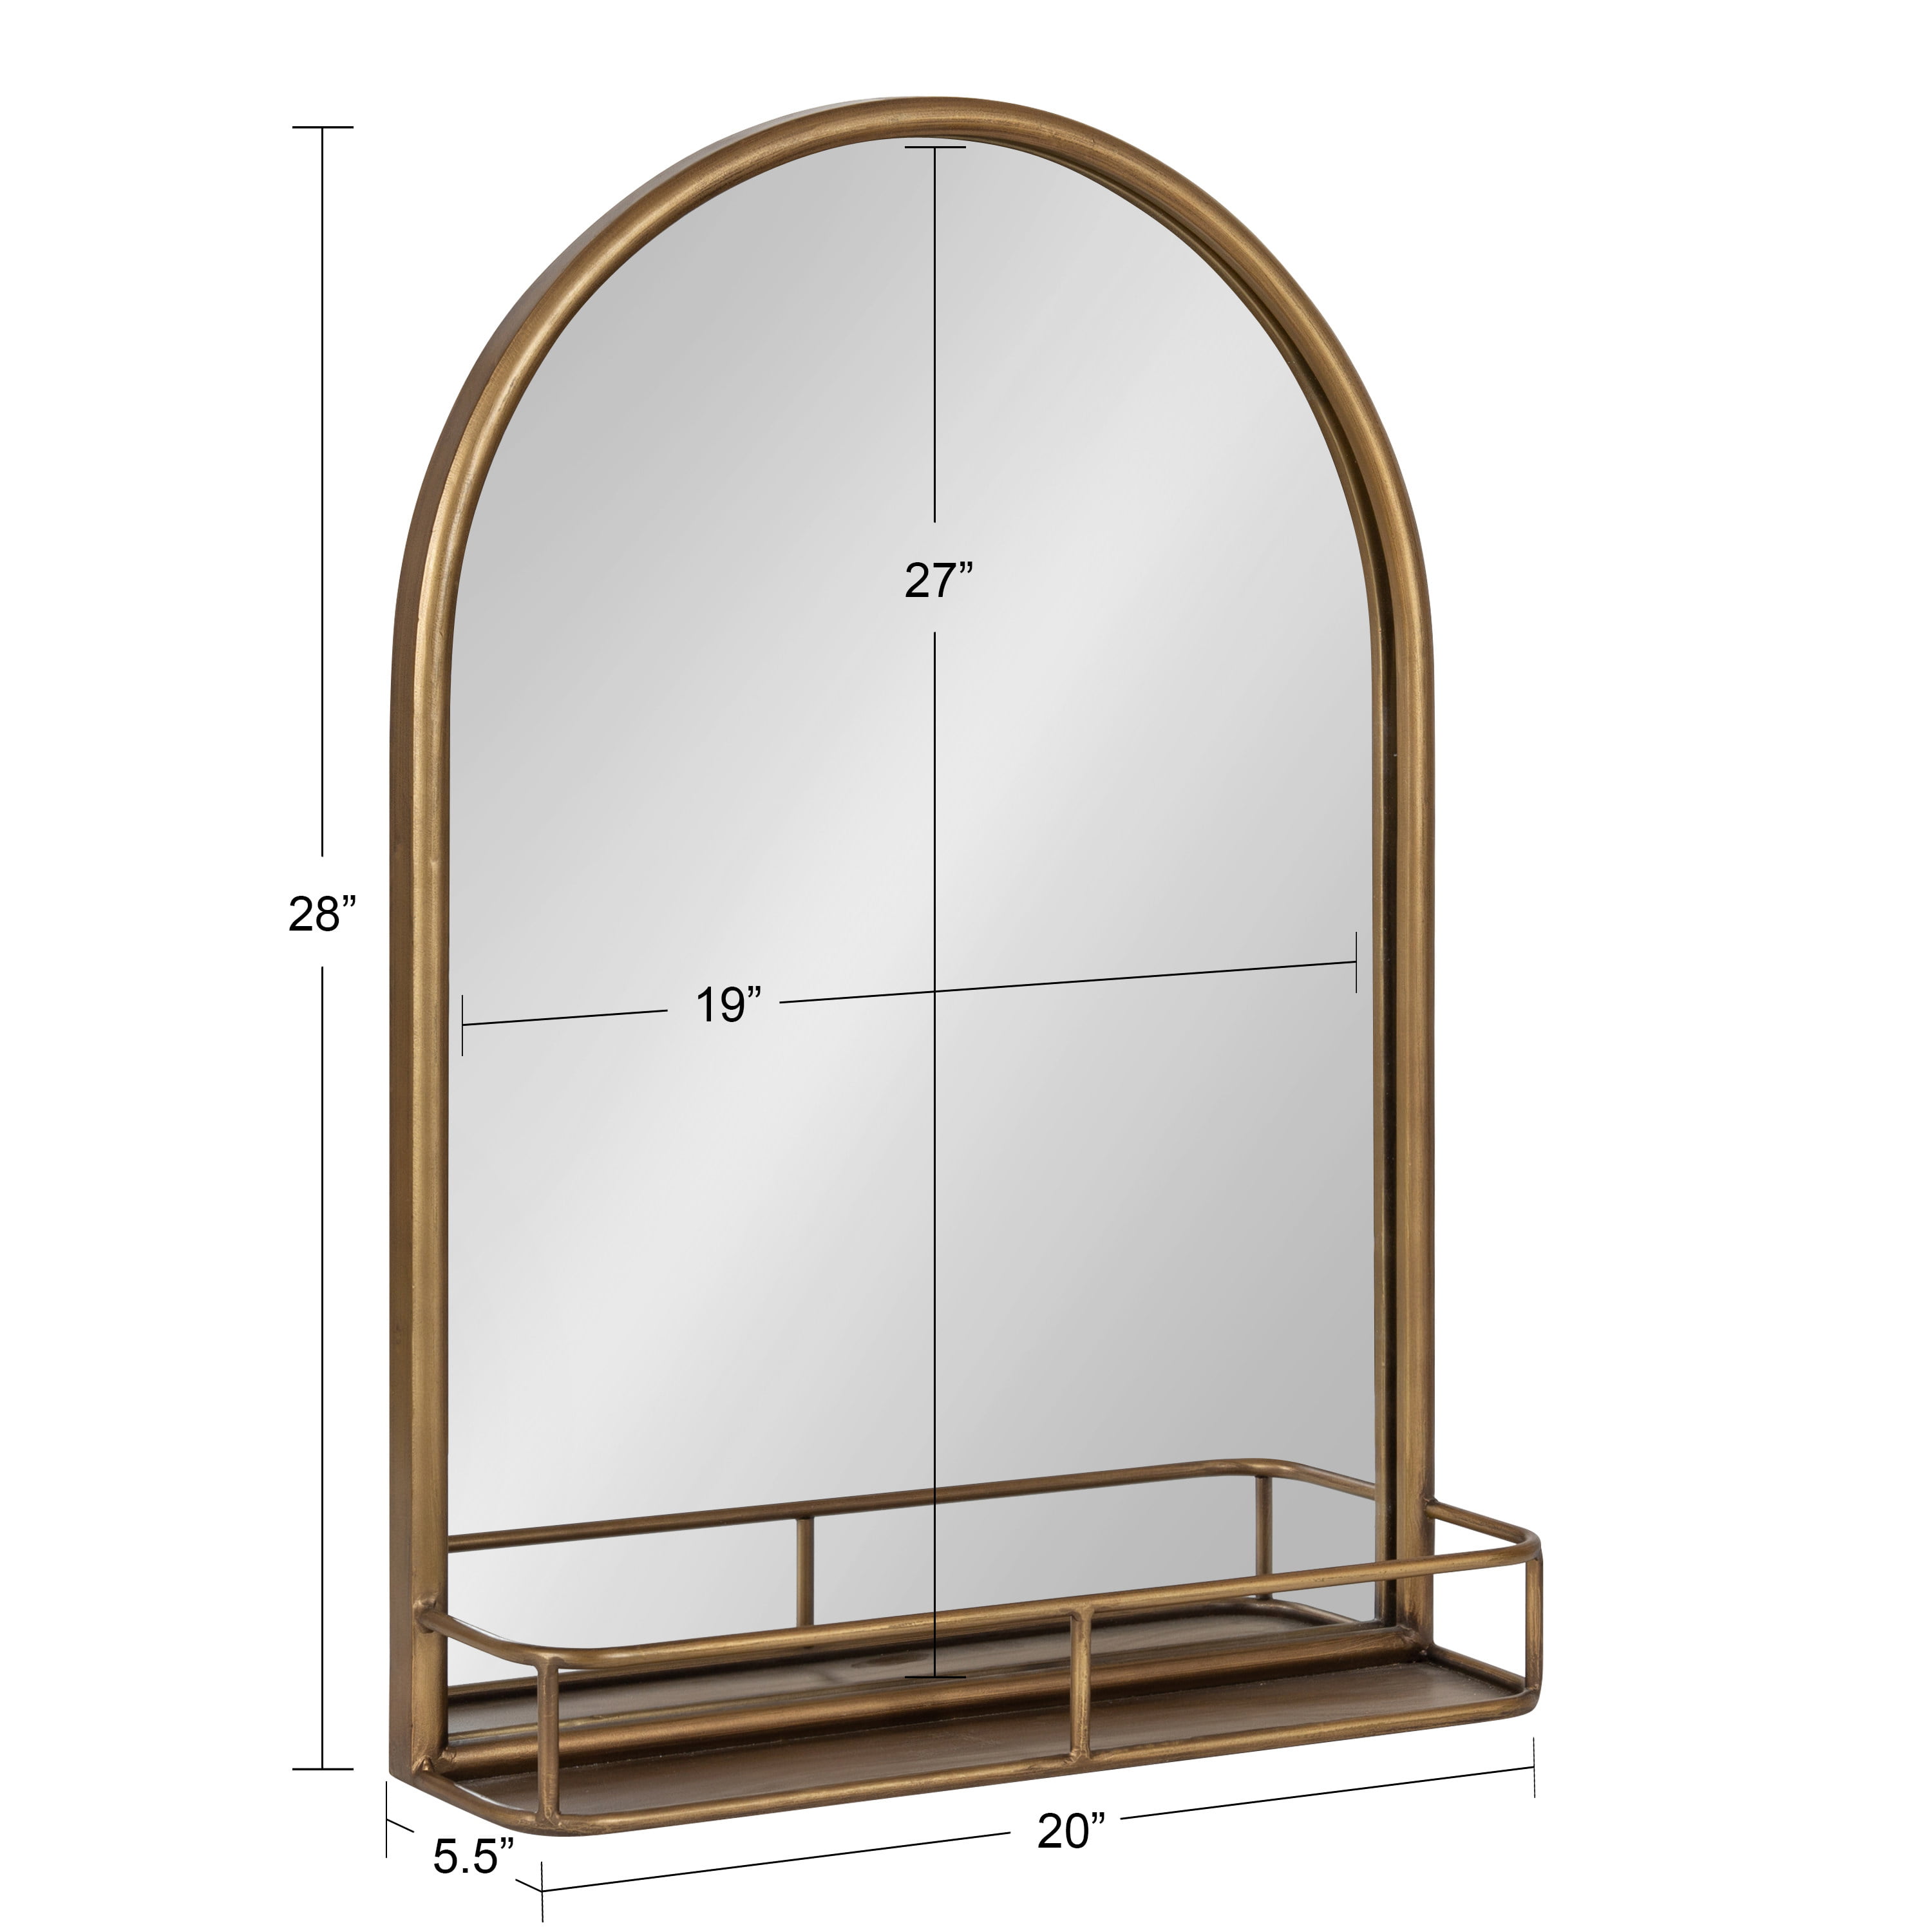 Kate and Laurel Estero Metal Framed Arch Wall Mirror with Shelf, Gold 20x28 